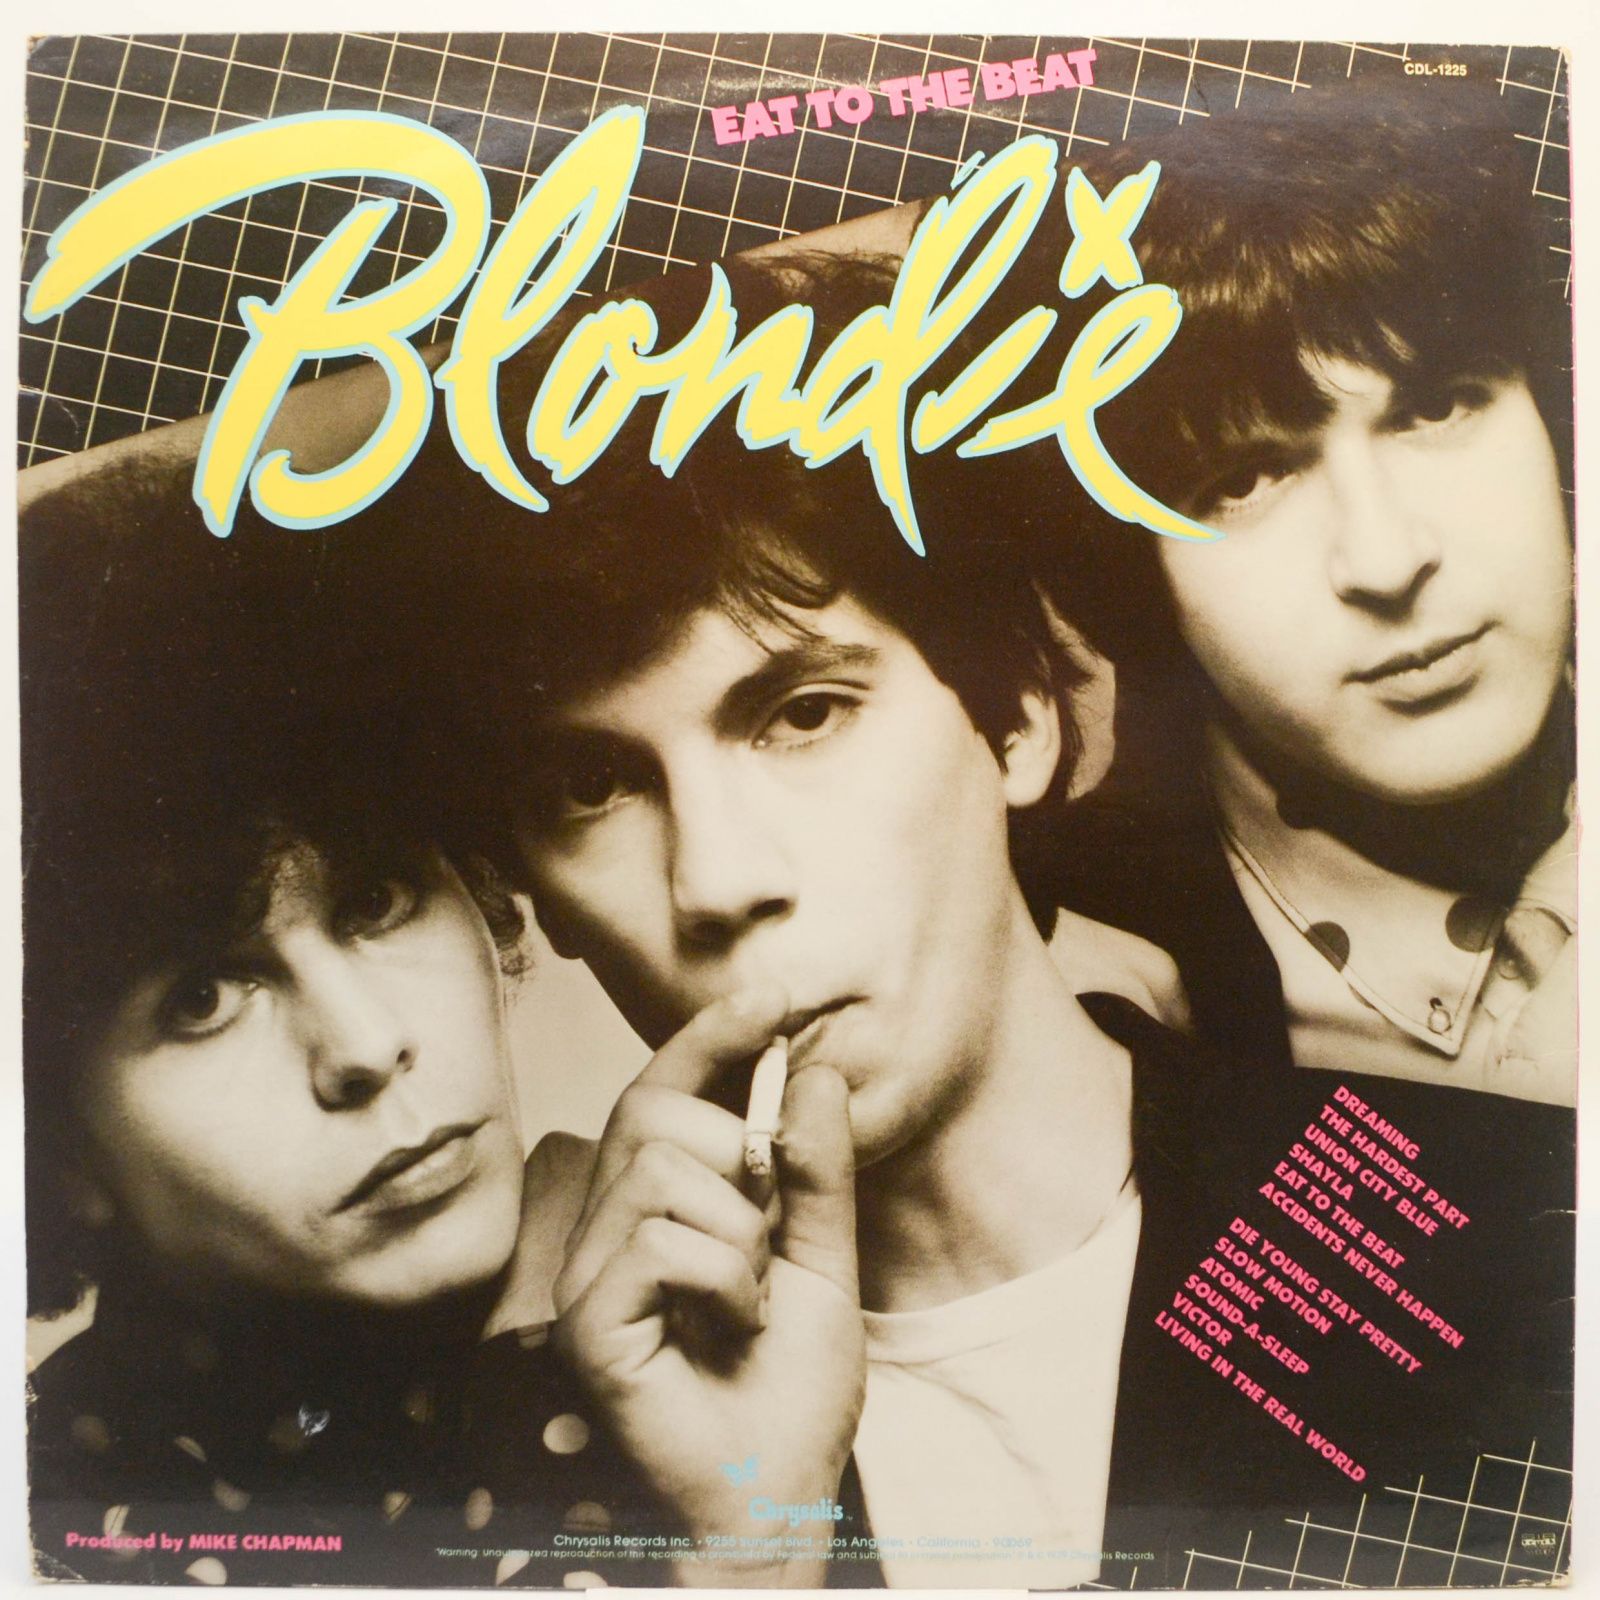 Blondie — Eat To The Beat, 1979